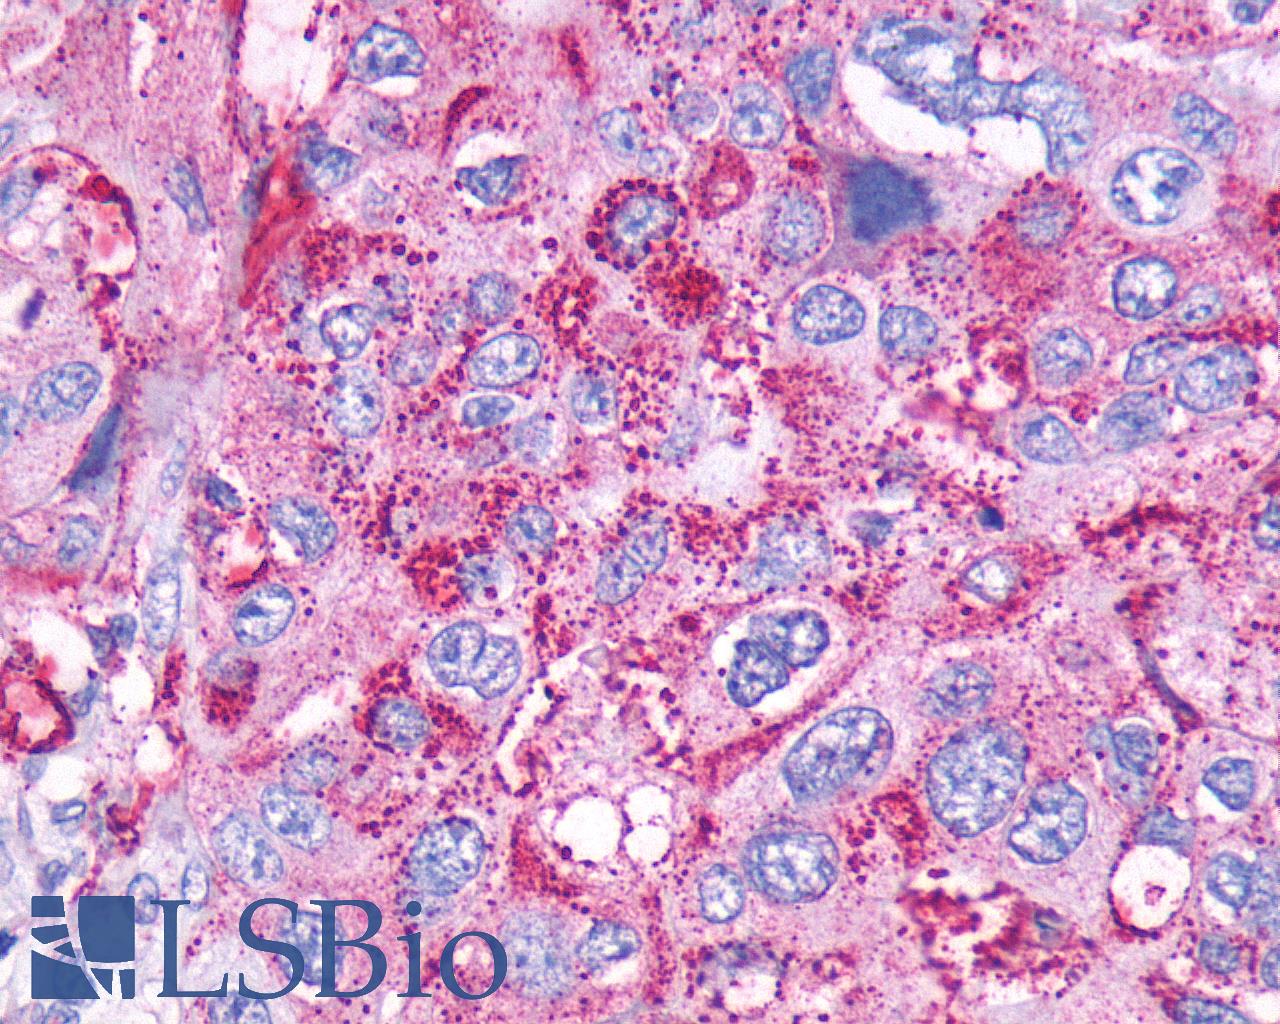 CCKBR / Cckb Antibody - Anti-CCKBR / Cckb antibody IHC of human Pancreas, Carcinoma. Immunohistochemistry of formalin-fixed, paraffin-embedded tissue after heat-induced antigen retrieval.